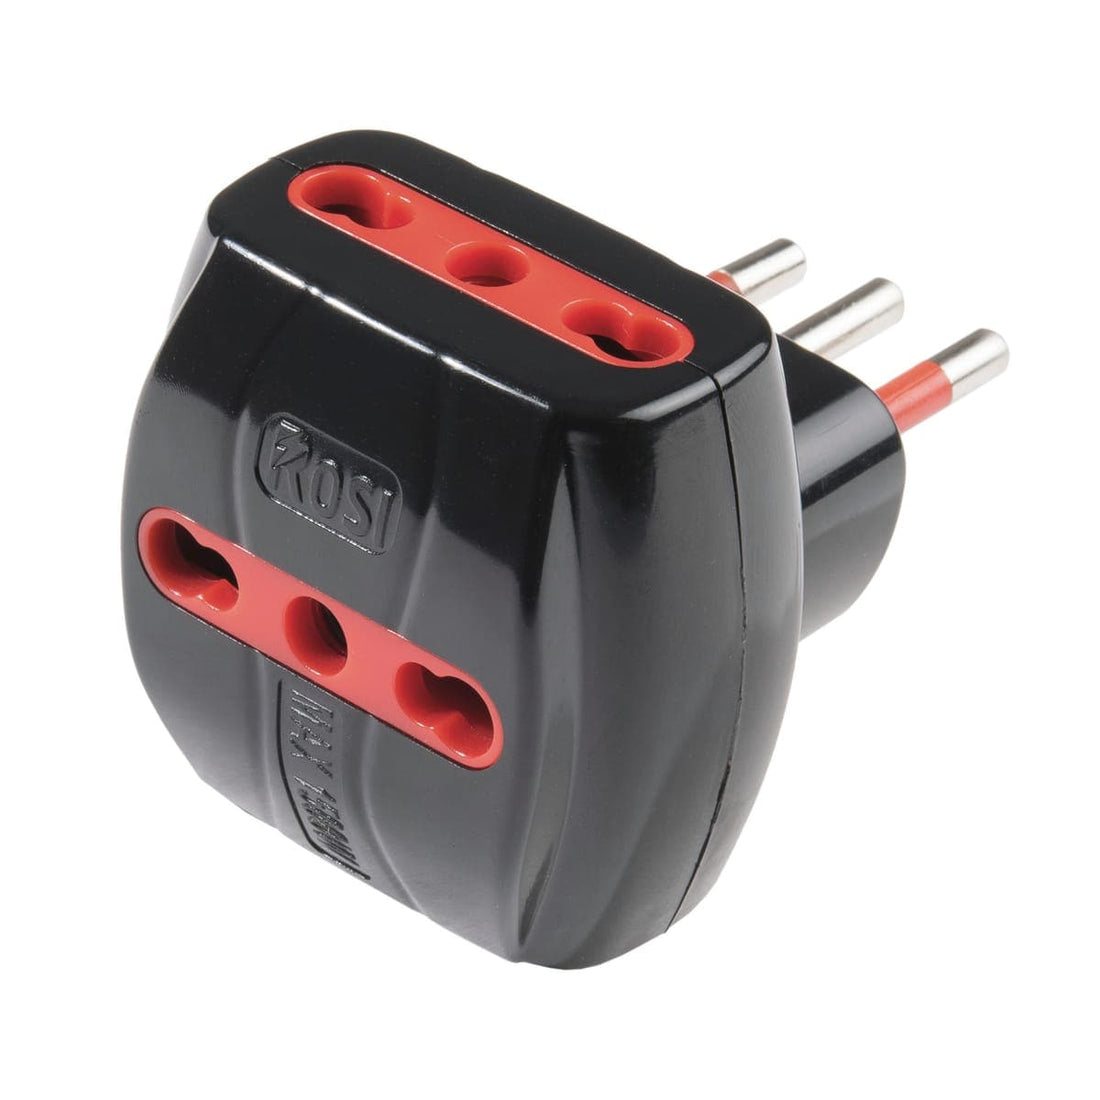 ADAPTER PLUG 10A 3 SOCKETS 10/16A WITH SELF-RESETTING LIMITER BLACK